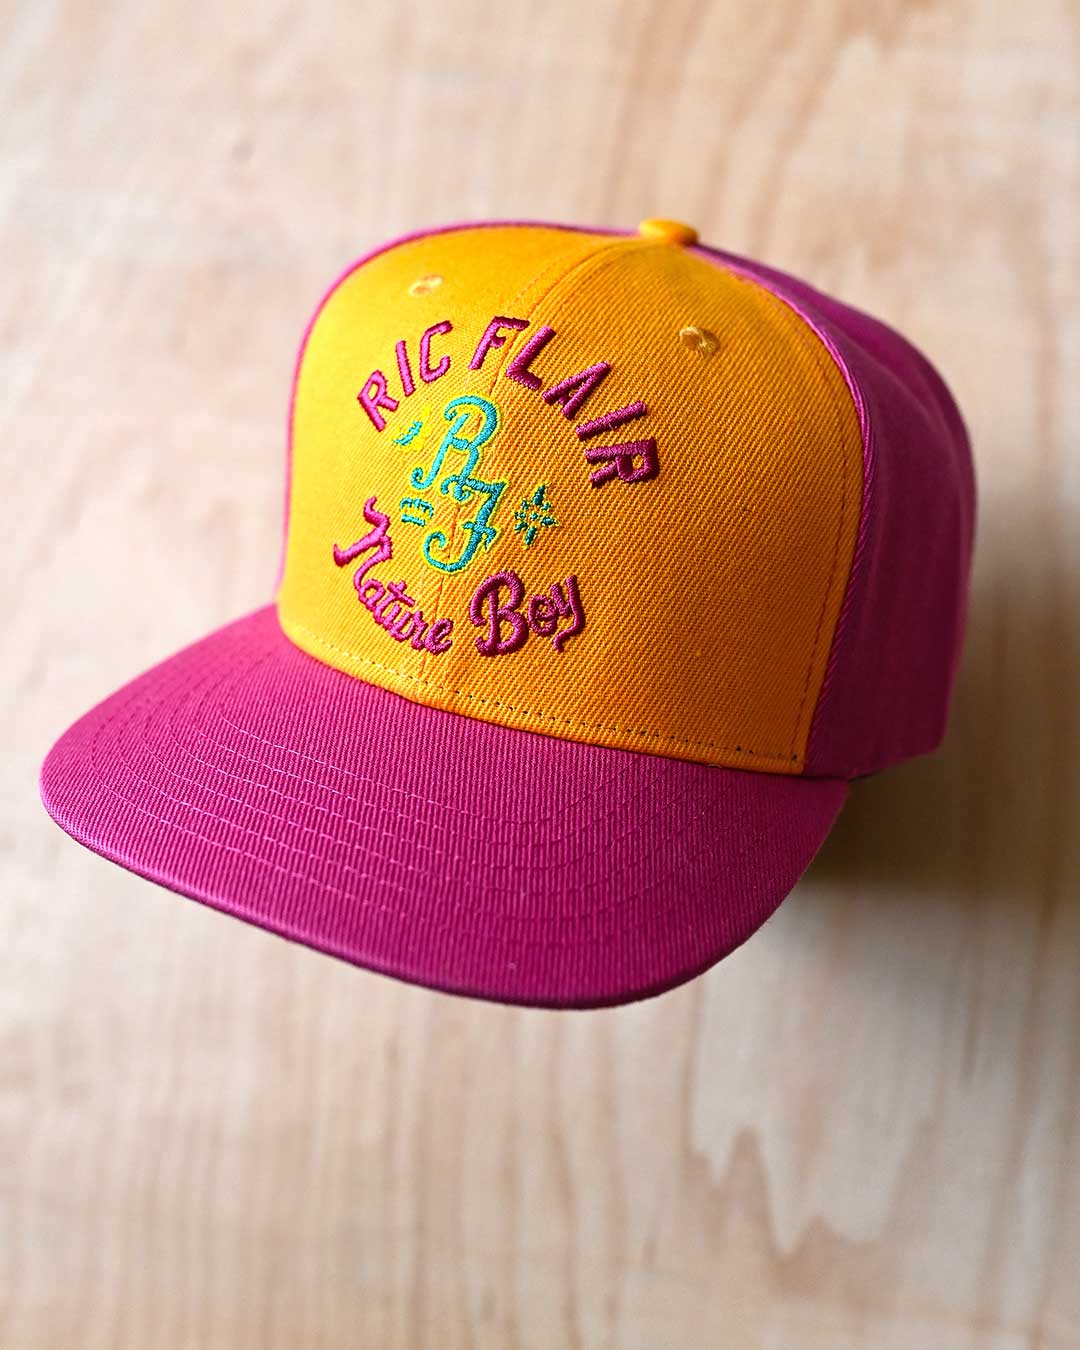 Ric Flair Nature Boy Pink Snapback Hat - Roots of Fight Canada